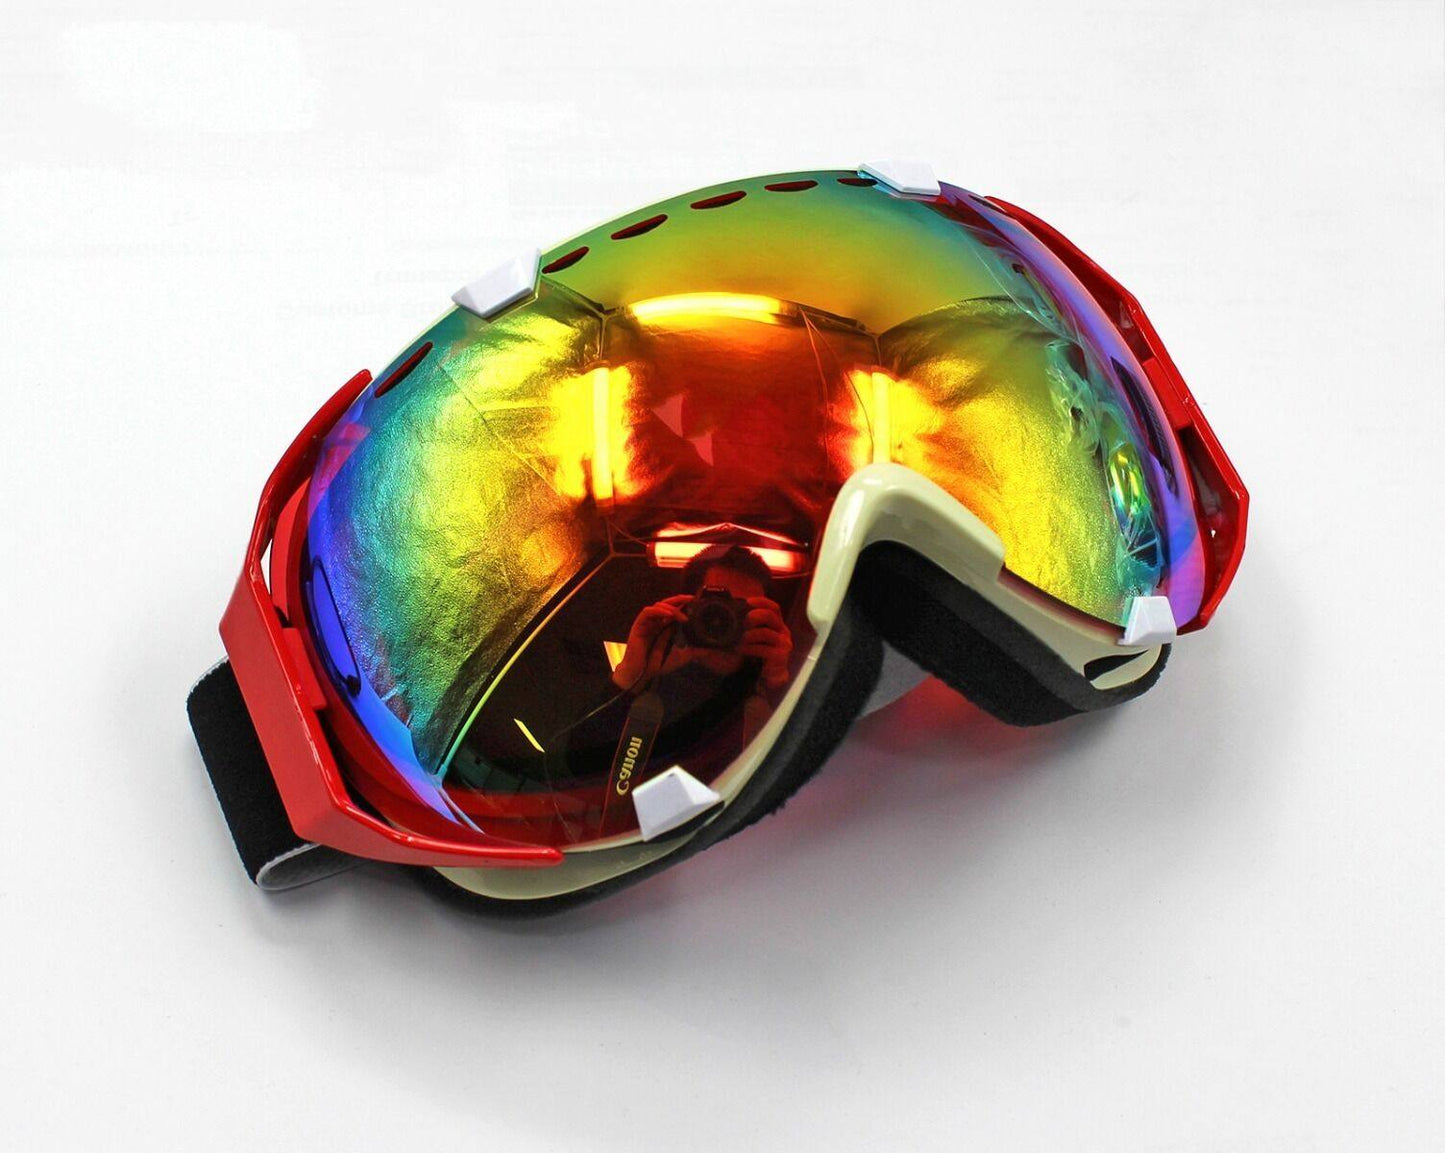 Red Double Lens Anti Fog Snow Goggle for Adult Unisex - TDRMOTO